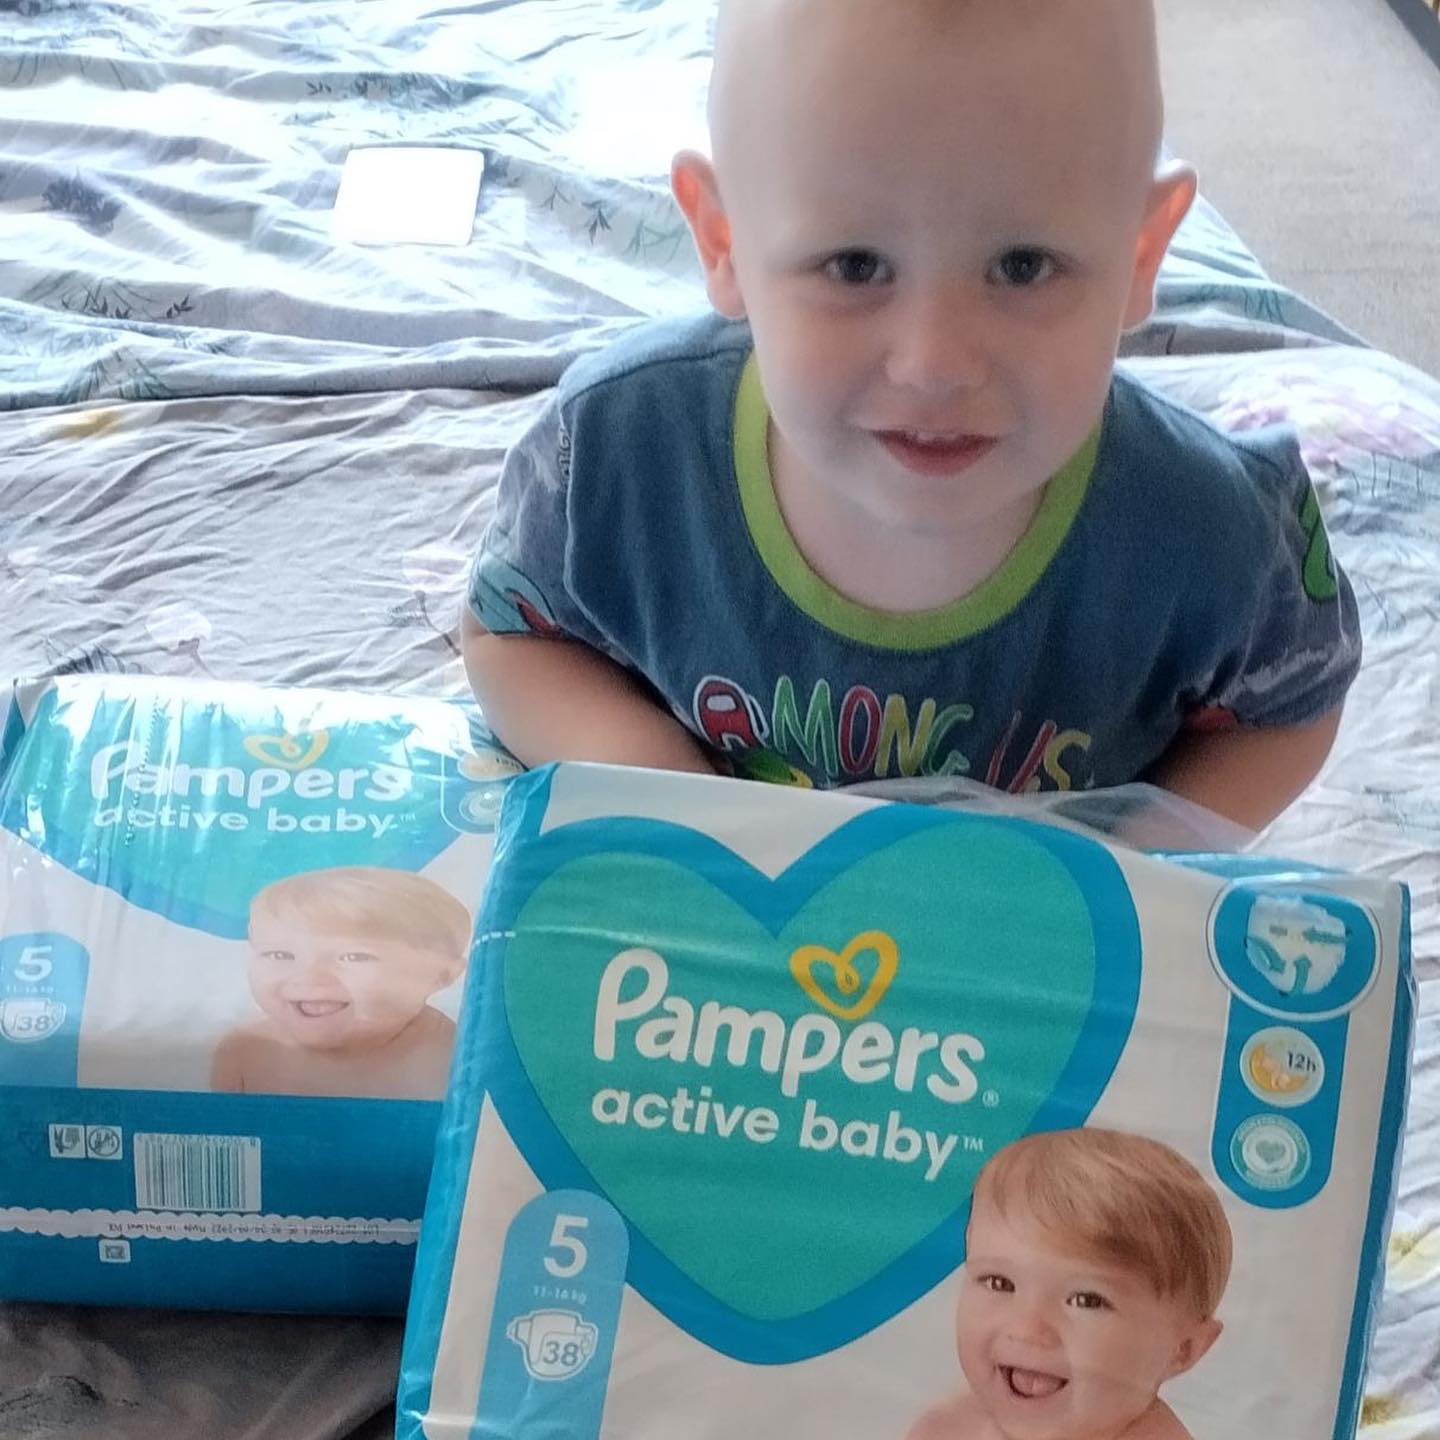 Pampers active baby diapers.